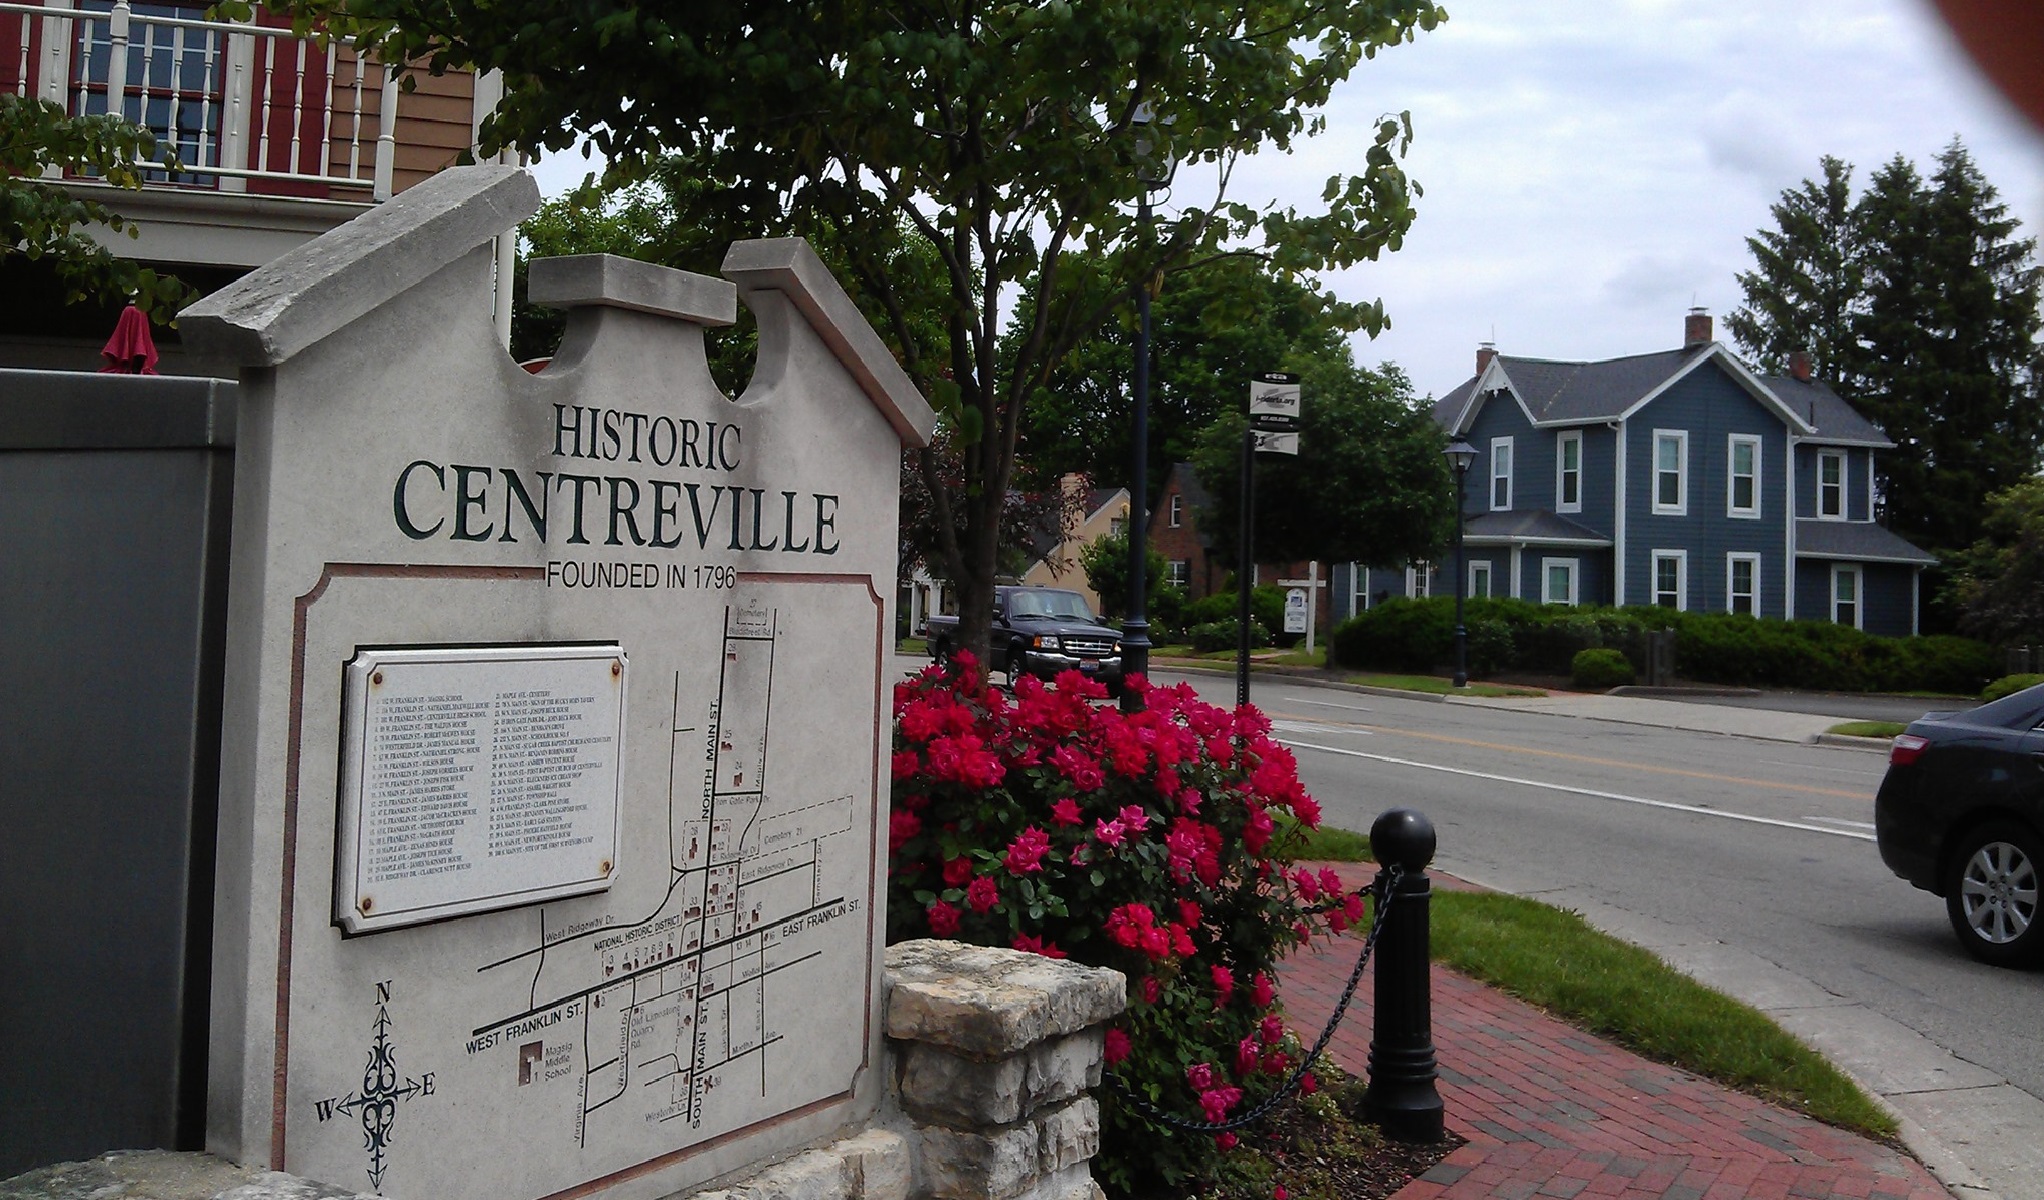 Welcome sign in uptown Centerville, Ohio.